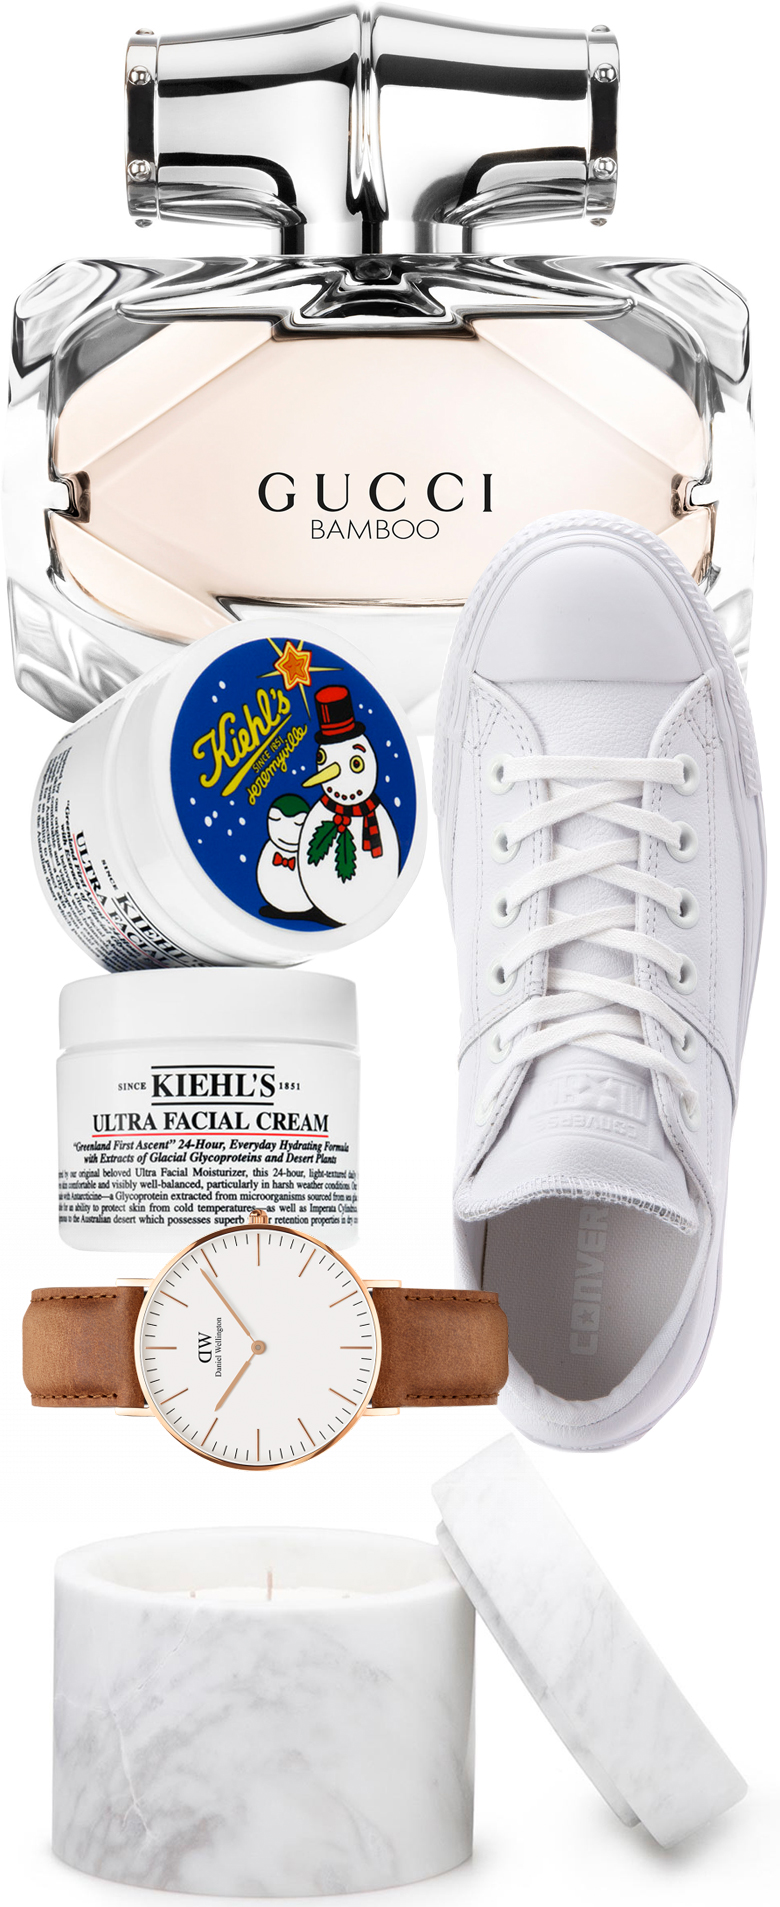 The Ultimate Gift Guide For Her: Simple & Chic